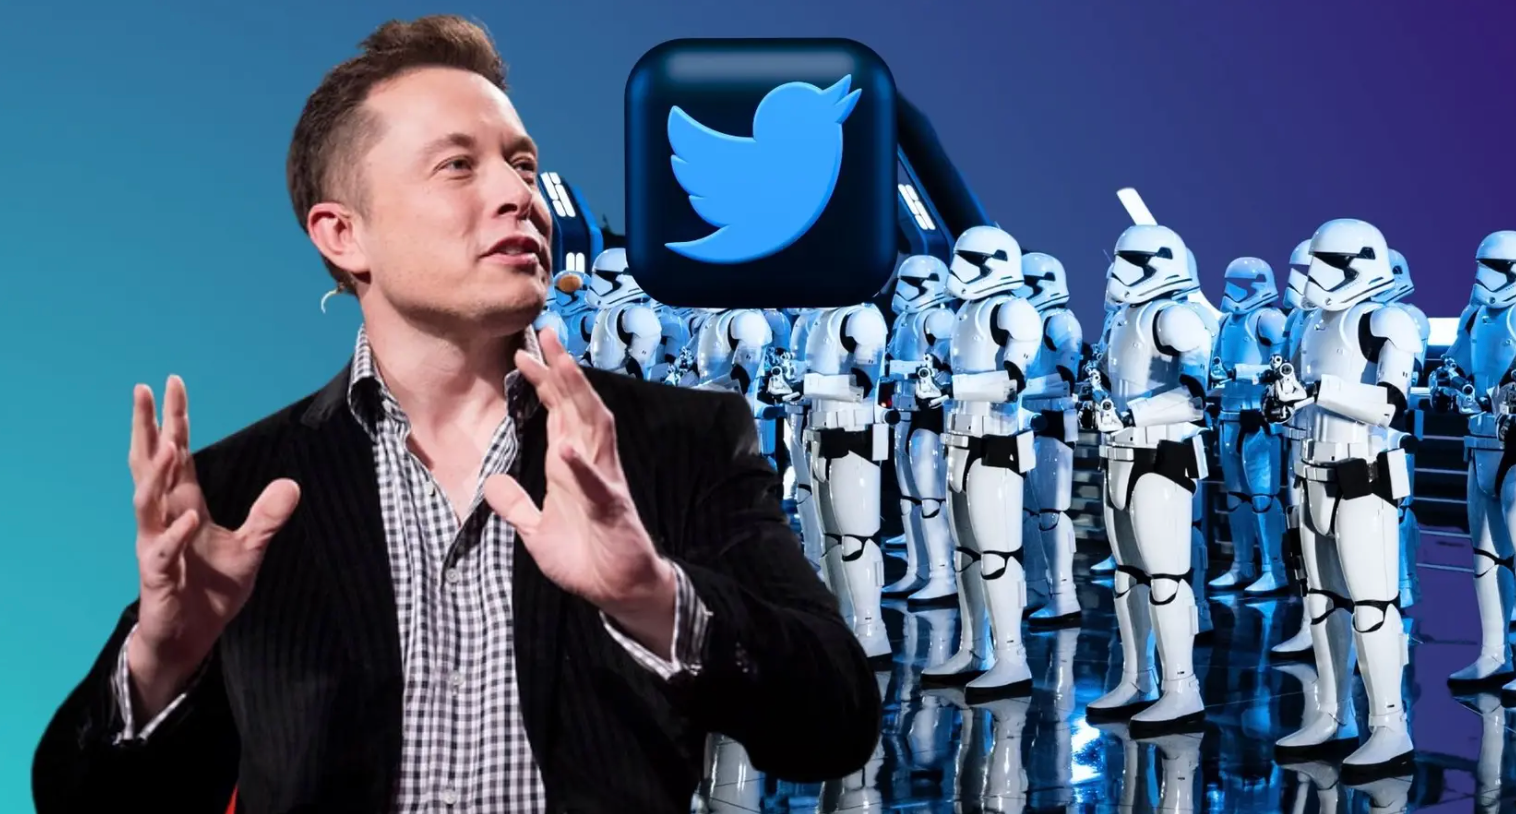 Harvard Expert Says Twitter Deal Could Be Bad For Elon Musk: Here's Why